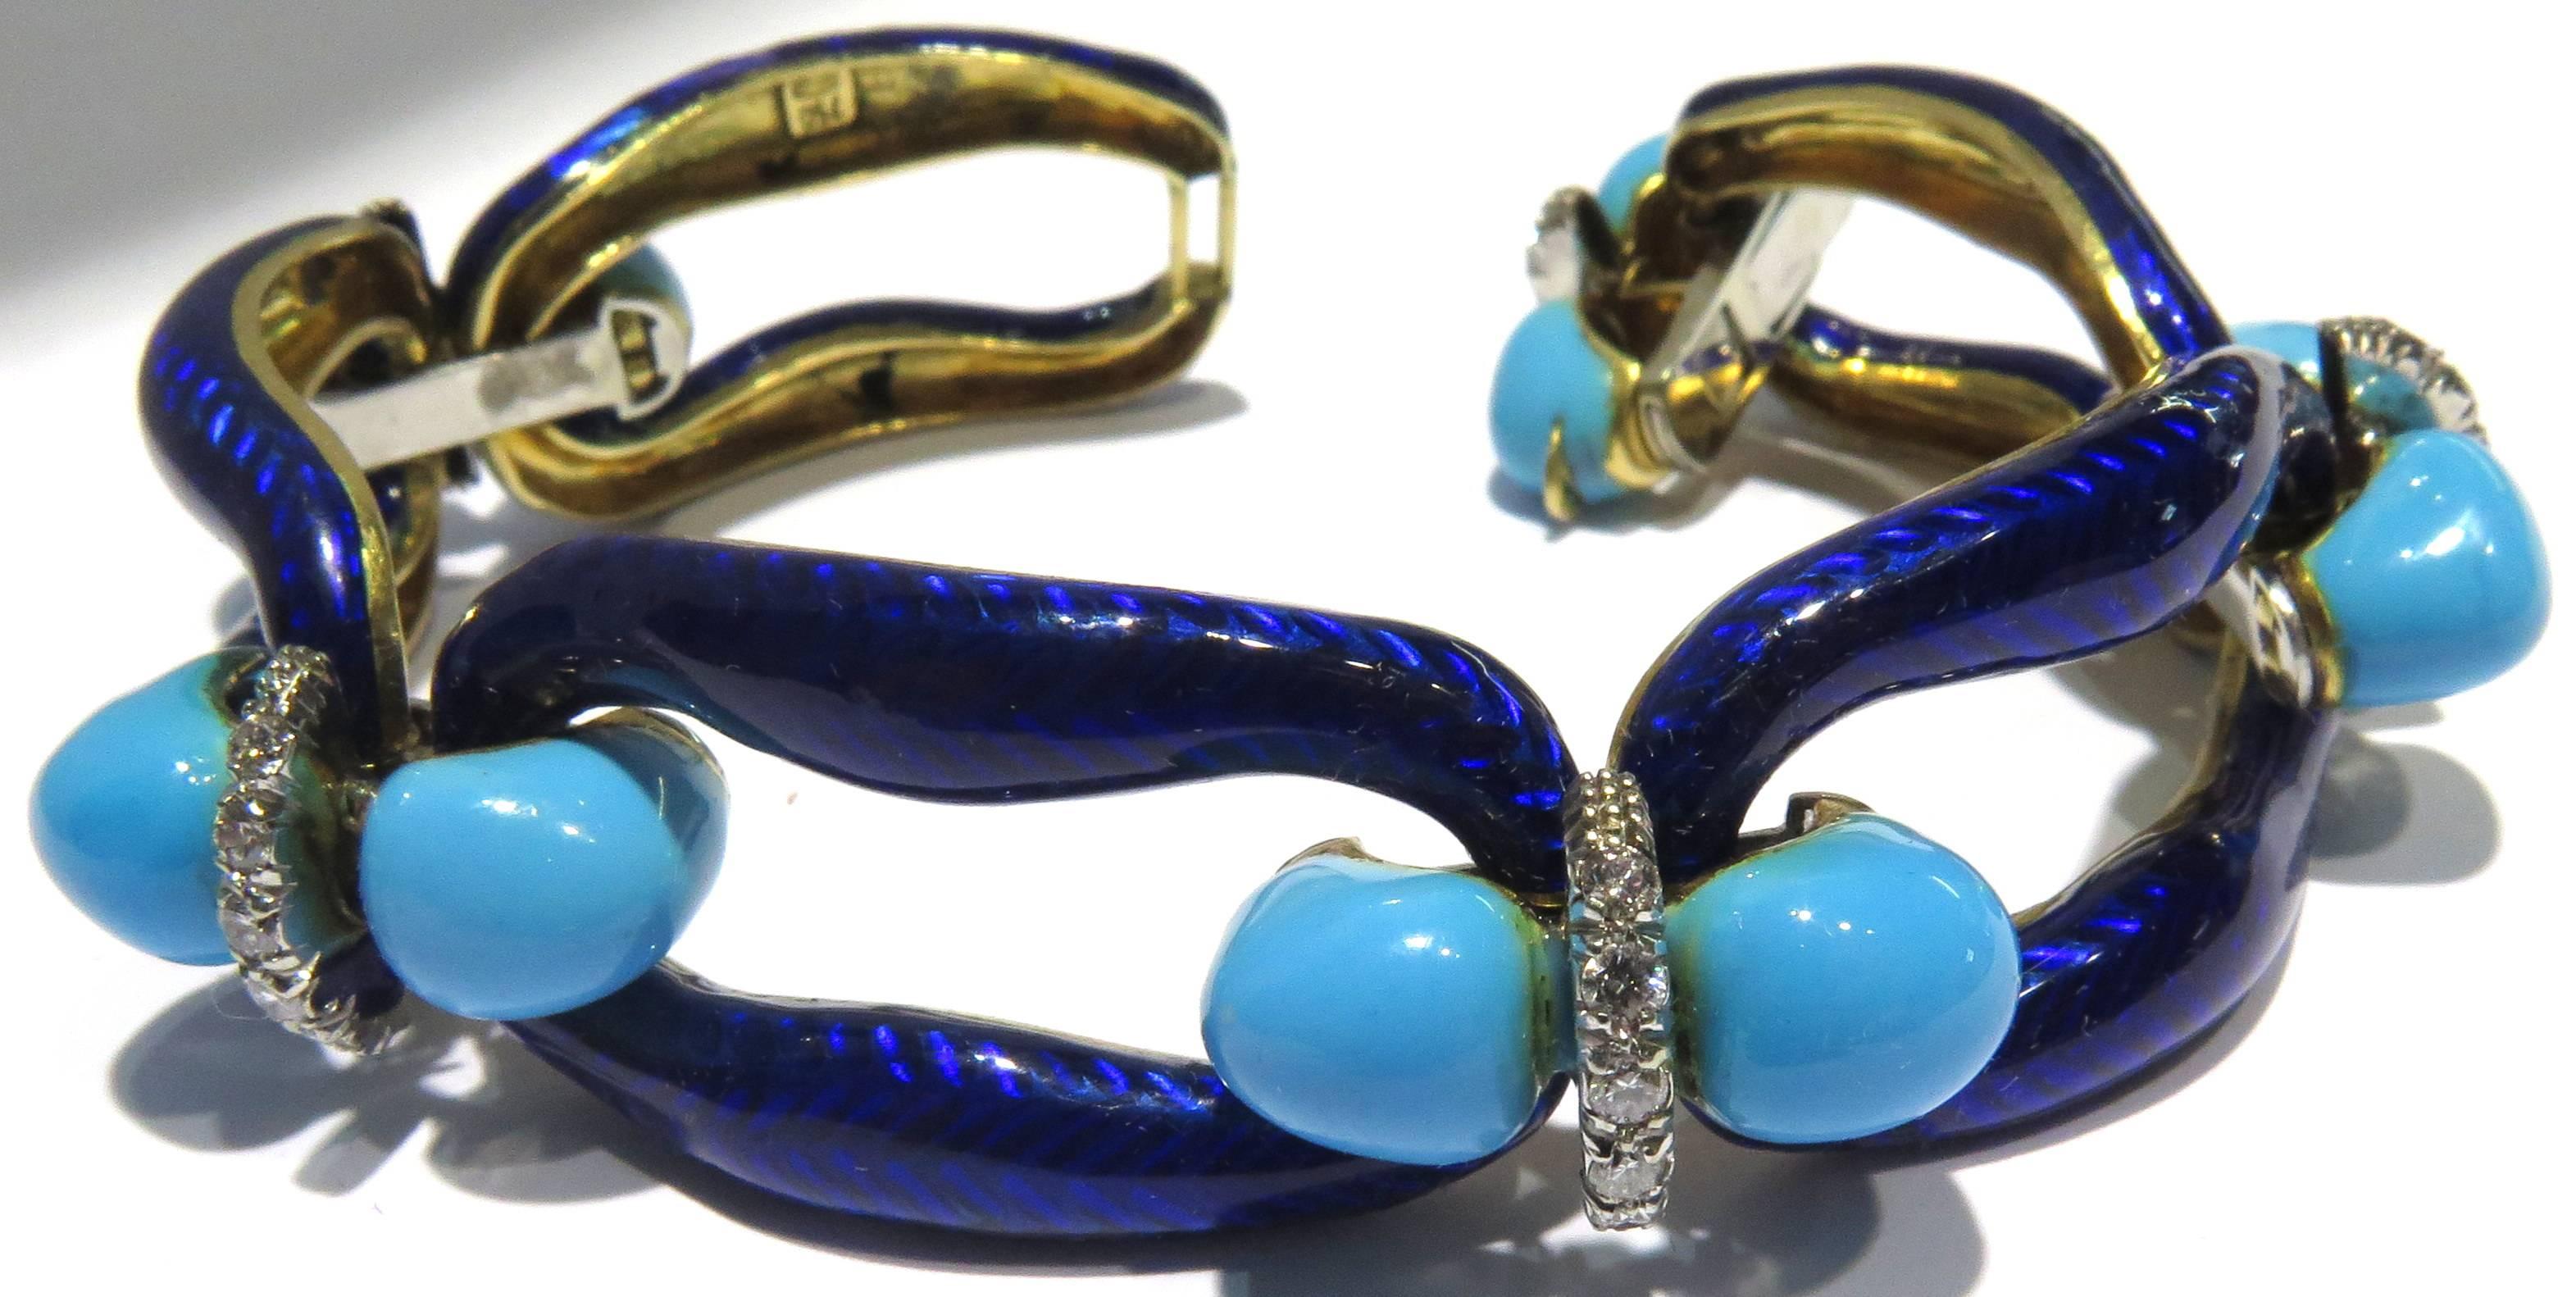 This elegant 18k gold bracelet is very comfortable to wear. With the stunning cobalt blue and turquoise enamels being separated by diamond bars, the Chic factor is on overload.
This bracelet measures 7 1/2 inches long by 3/4 inch wide
This bracelet